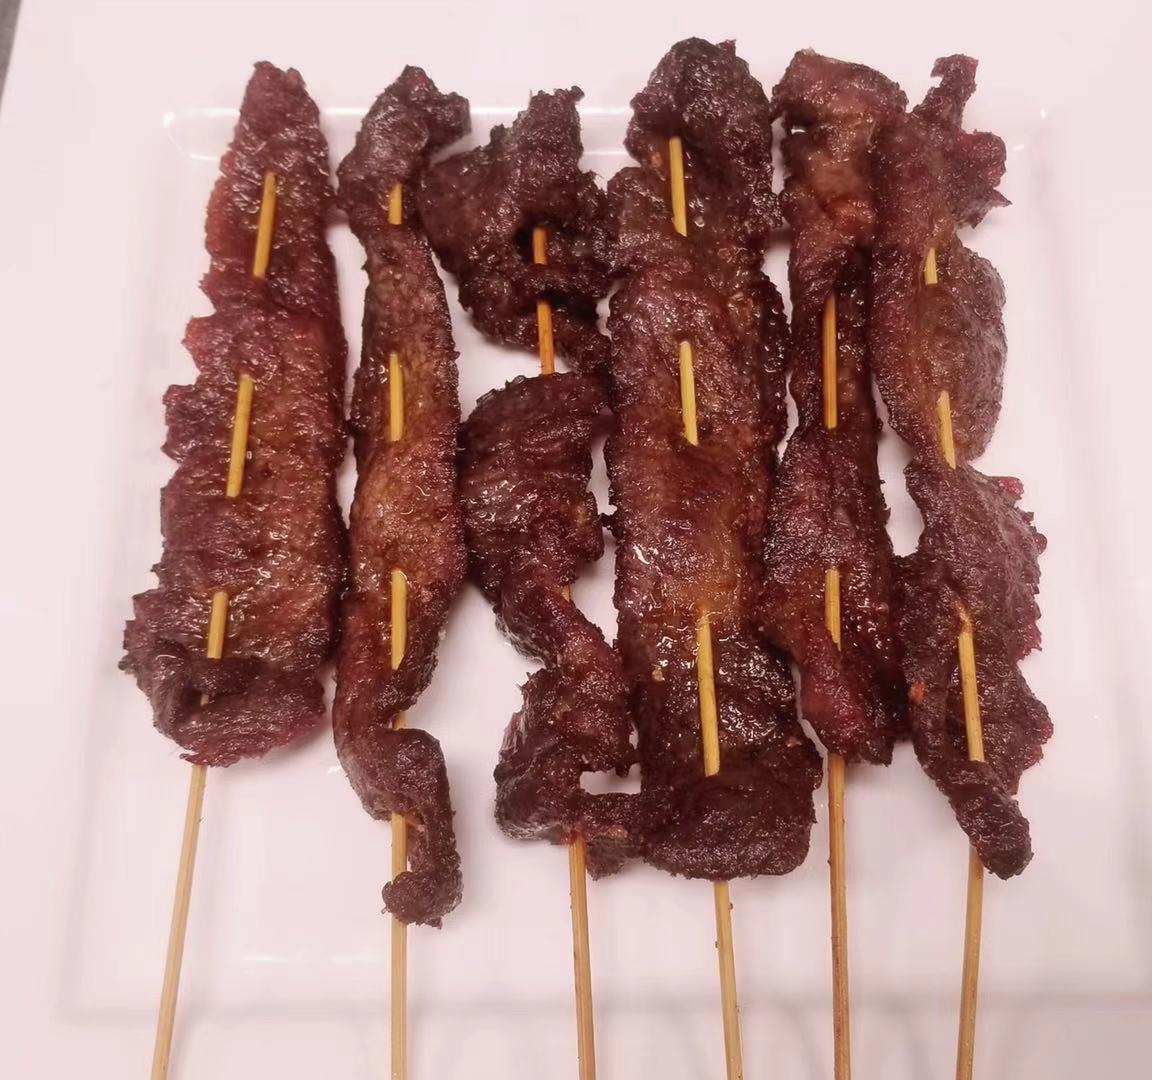 106. Spiced Beef on a skewer (6)